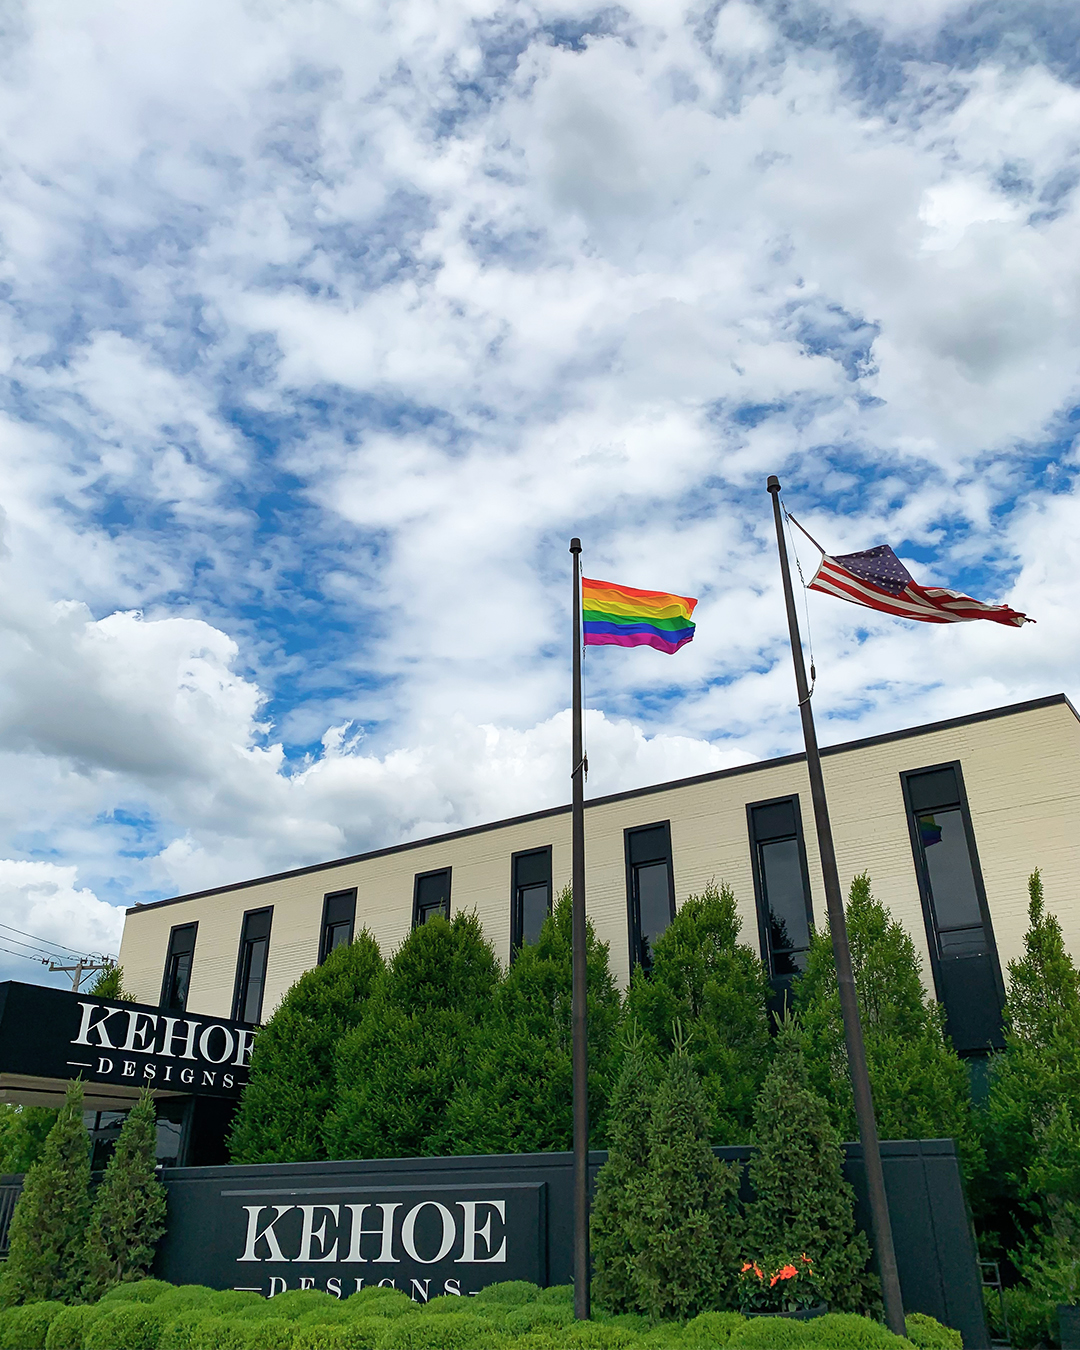 KEHOE DESIGNS, Pride, Pride Month, LGBTQ, Chicago, Diversity, Inclusion, Events, Workplace